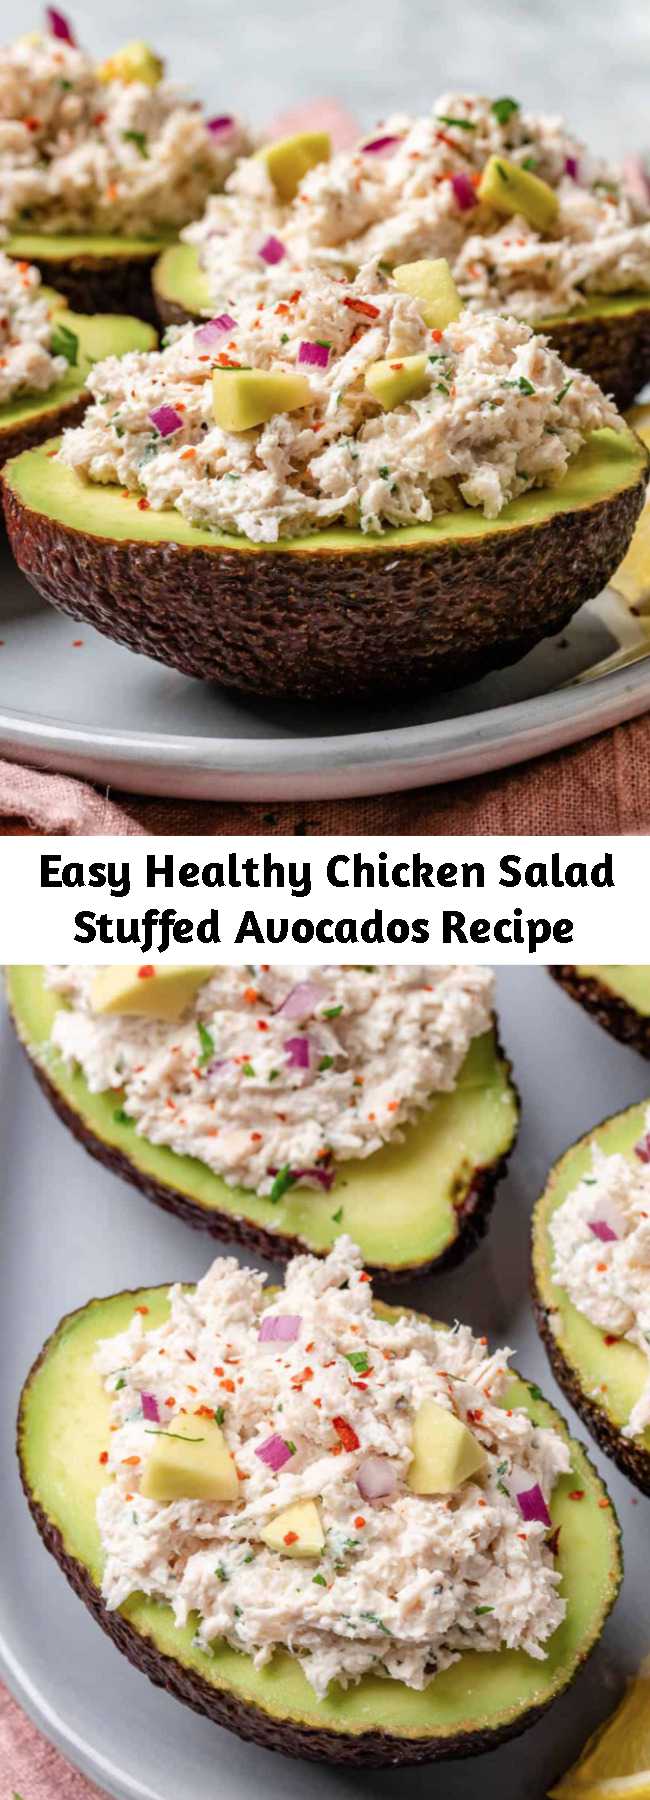 Easy Healthy Chicken Salad Stuffed Avocados Recipe - This healthy chicken salad recipe is lightened up using Greek yogurt instead of mayonnaise. So creamy, flavorful, and easy to make. A simple chicken salad recipe that can be used top over salads, made into a sandwich and stuffed in avocados.